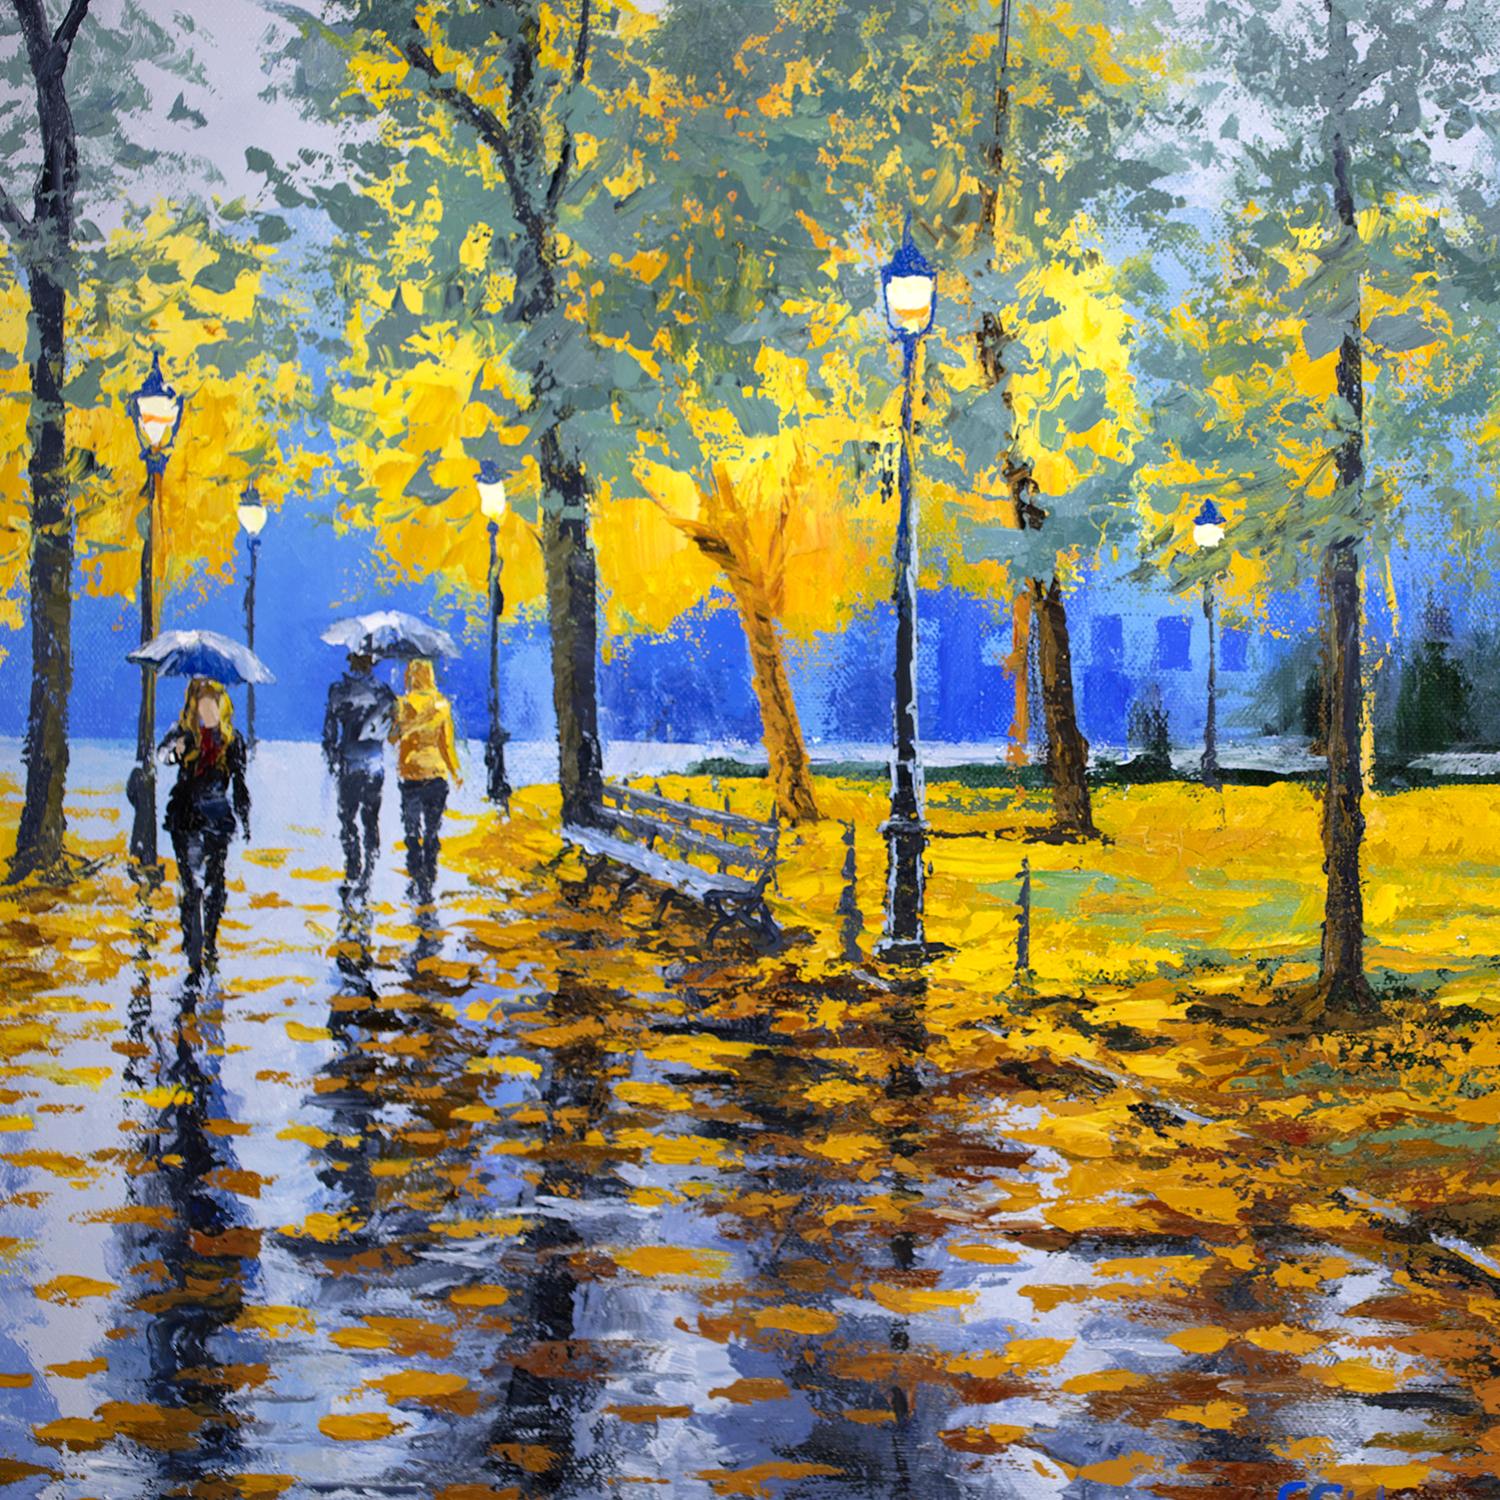 Onset of the Fall - Abstract Impressionist Painting by Stanislav Sidorov